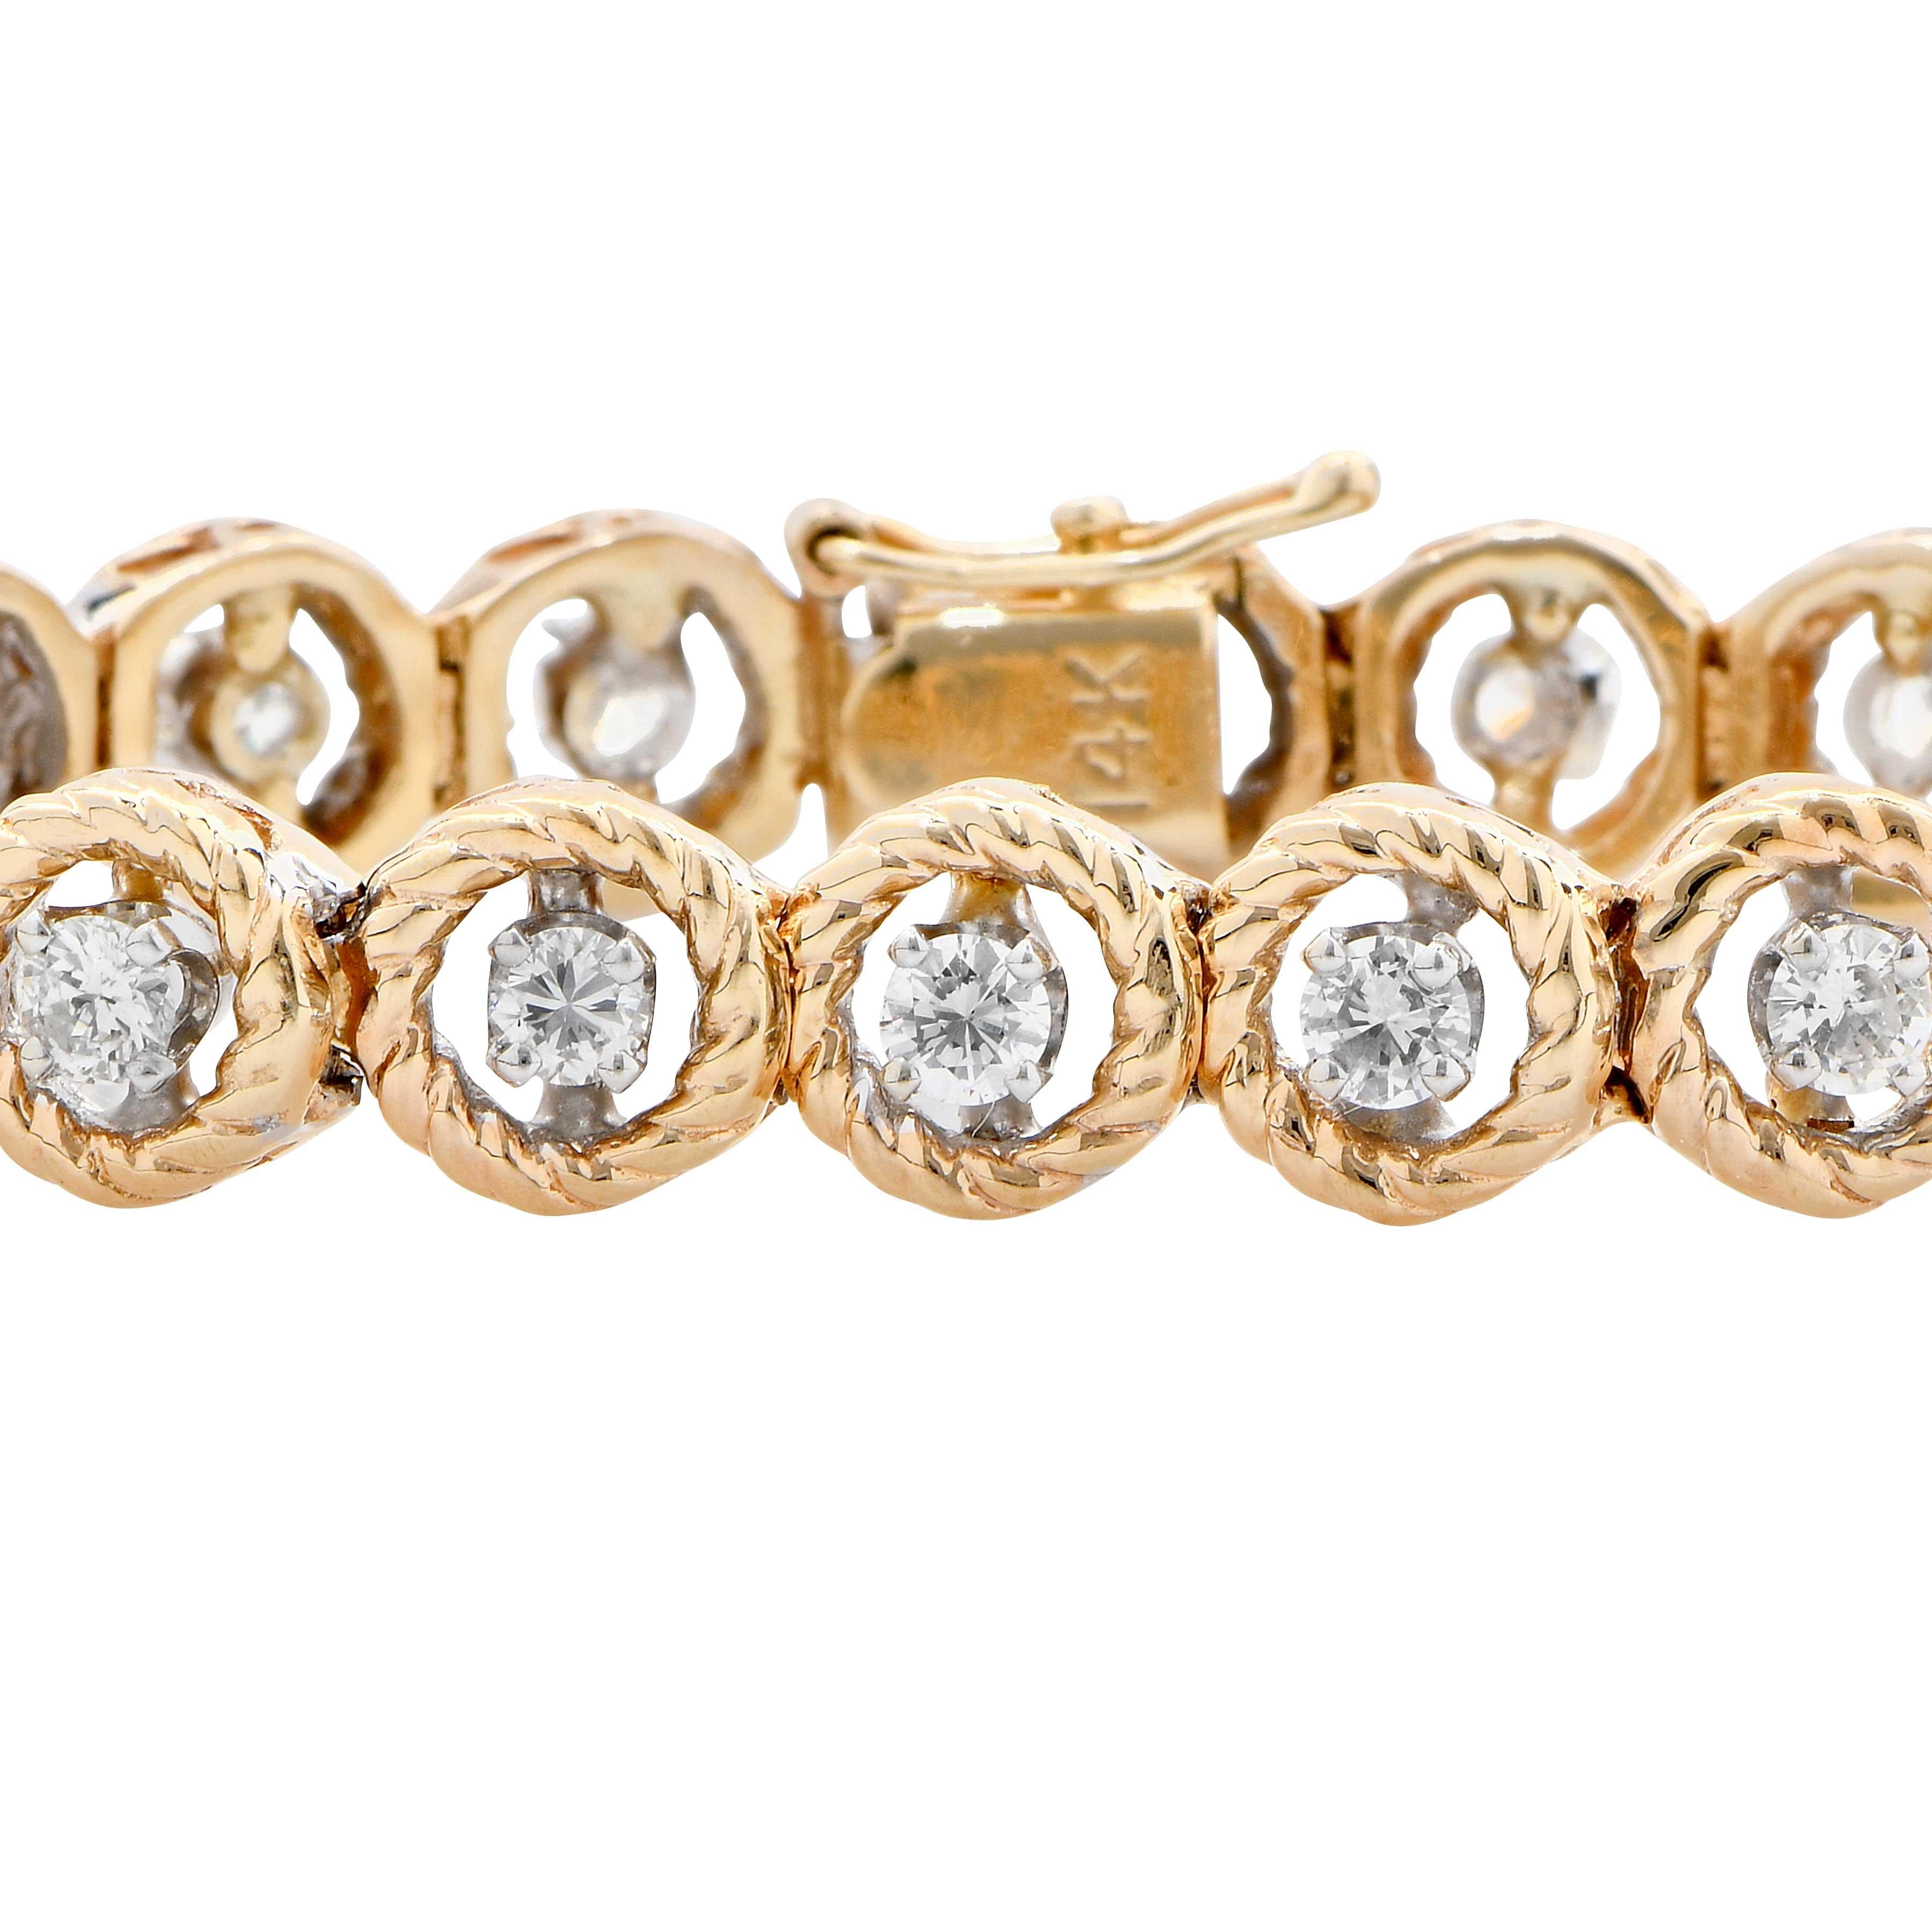 Hand crafted rope rondelle motif diamond bracelet featuring 23 round brilliant cut diamonds with an estimated total weight of 2.3 carats set in 14 Karat Yellow and White Gold.
Bracelet Length: 6.75 inches
Metal Type: 14 Karat Yellow and White